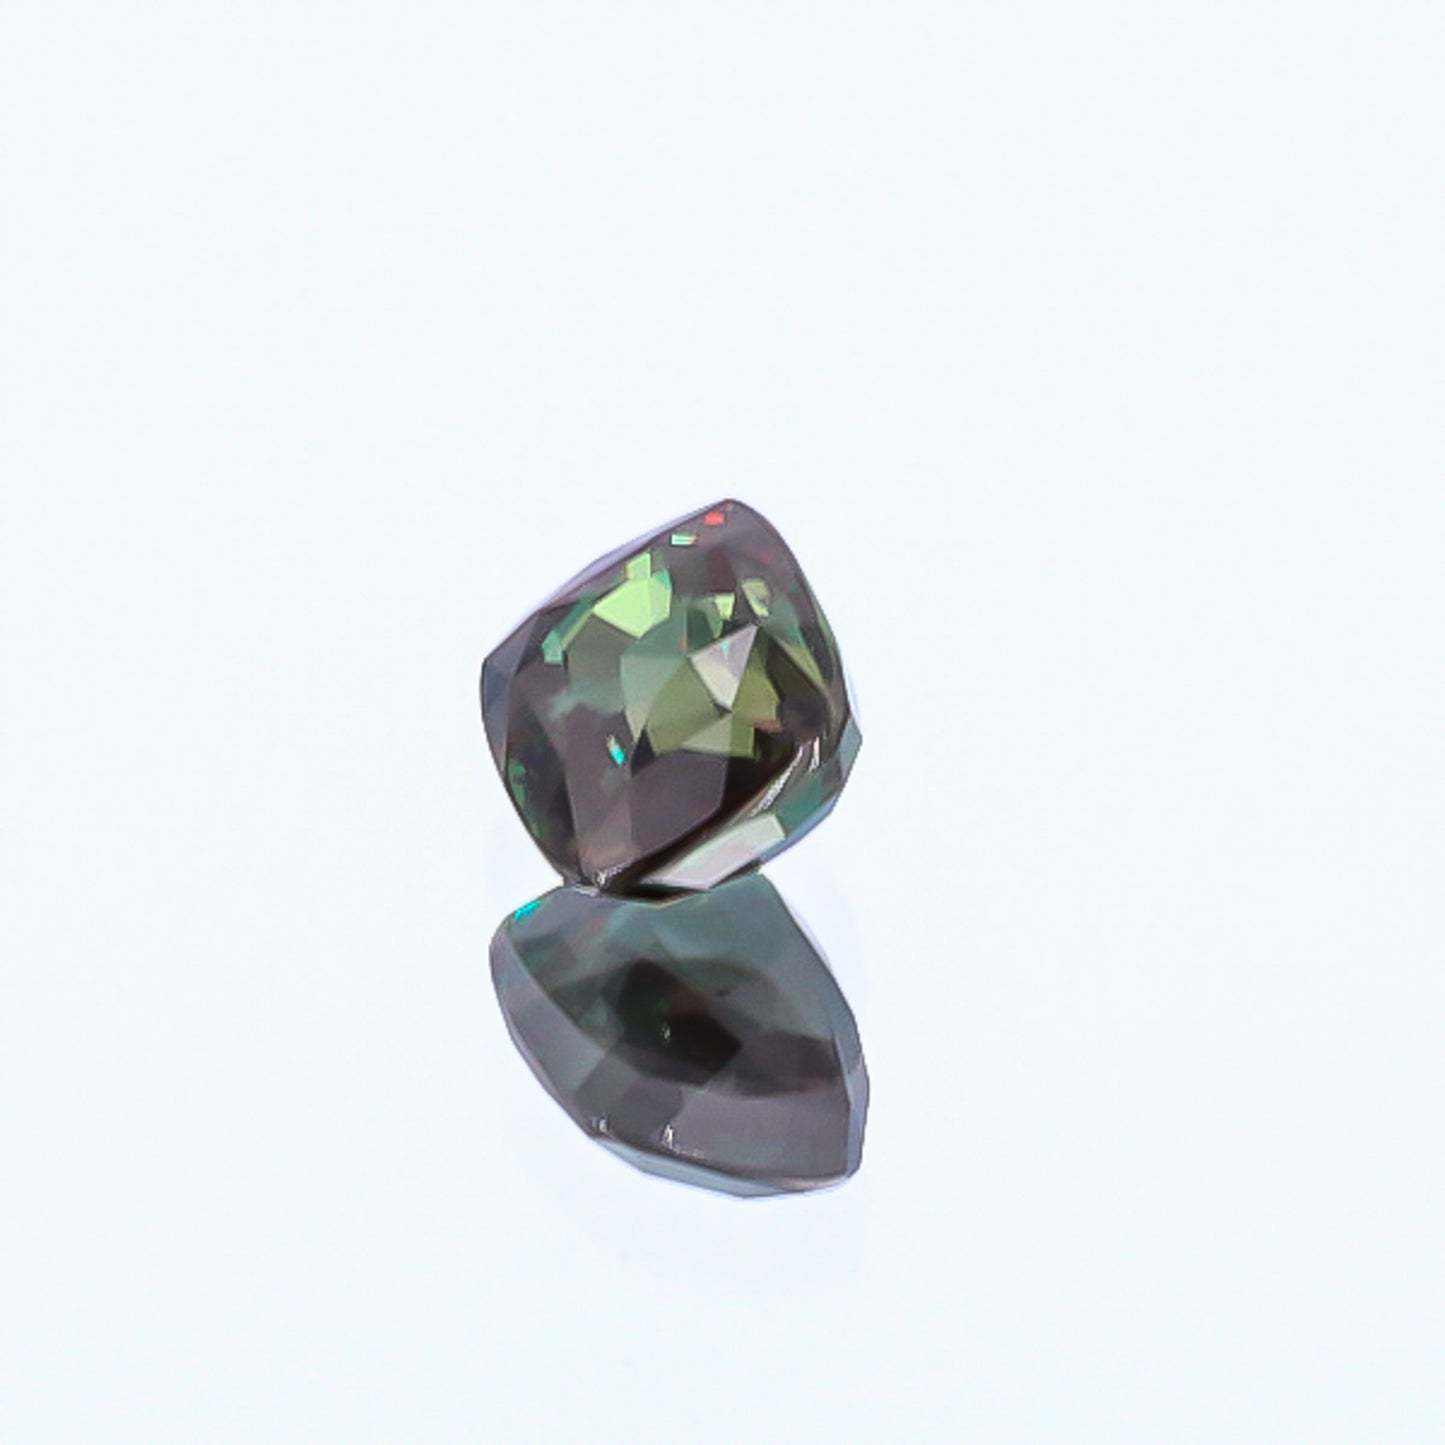 Natural Alexandrite Blue-Green Changing to Reddish Purple Color 3.98 Carats With GIA Report